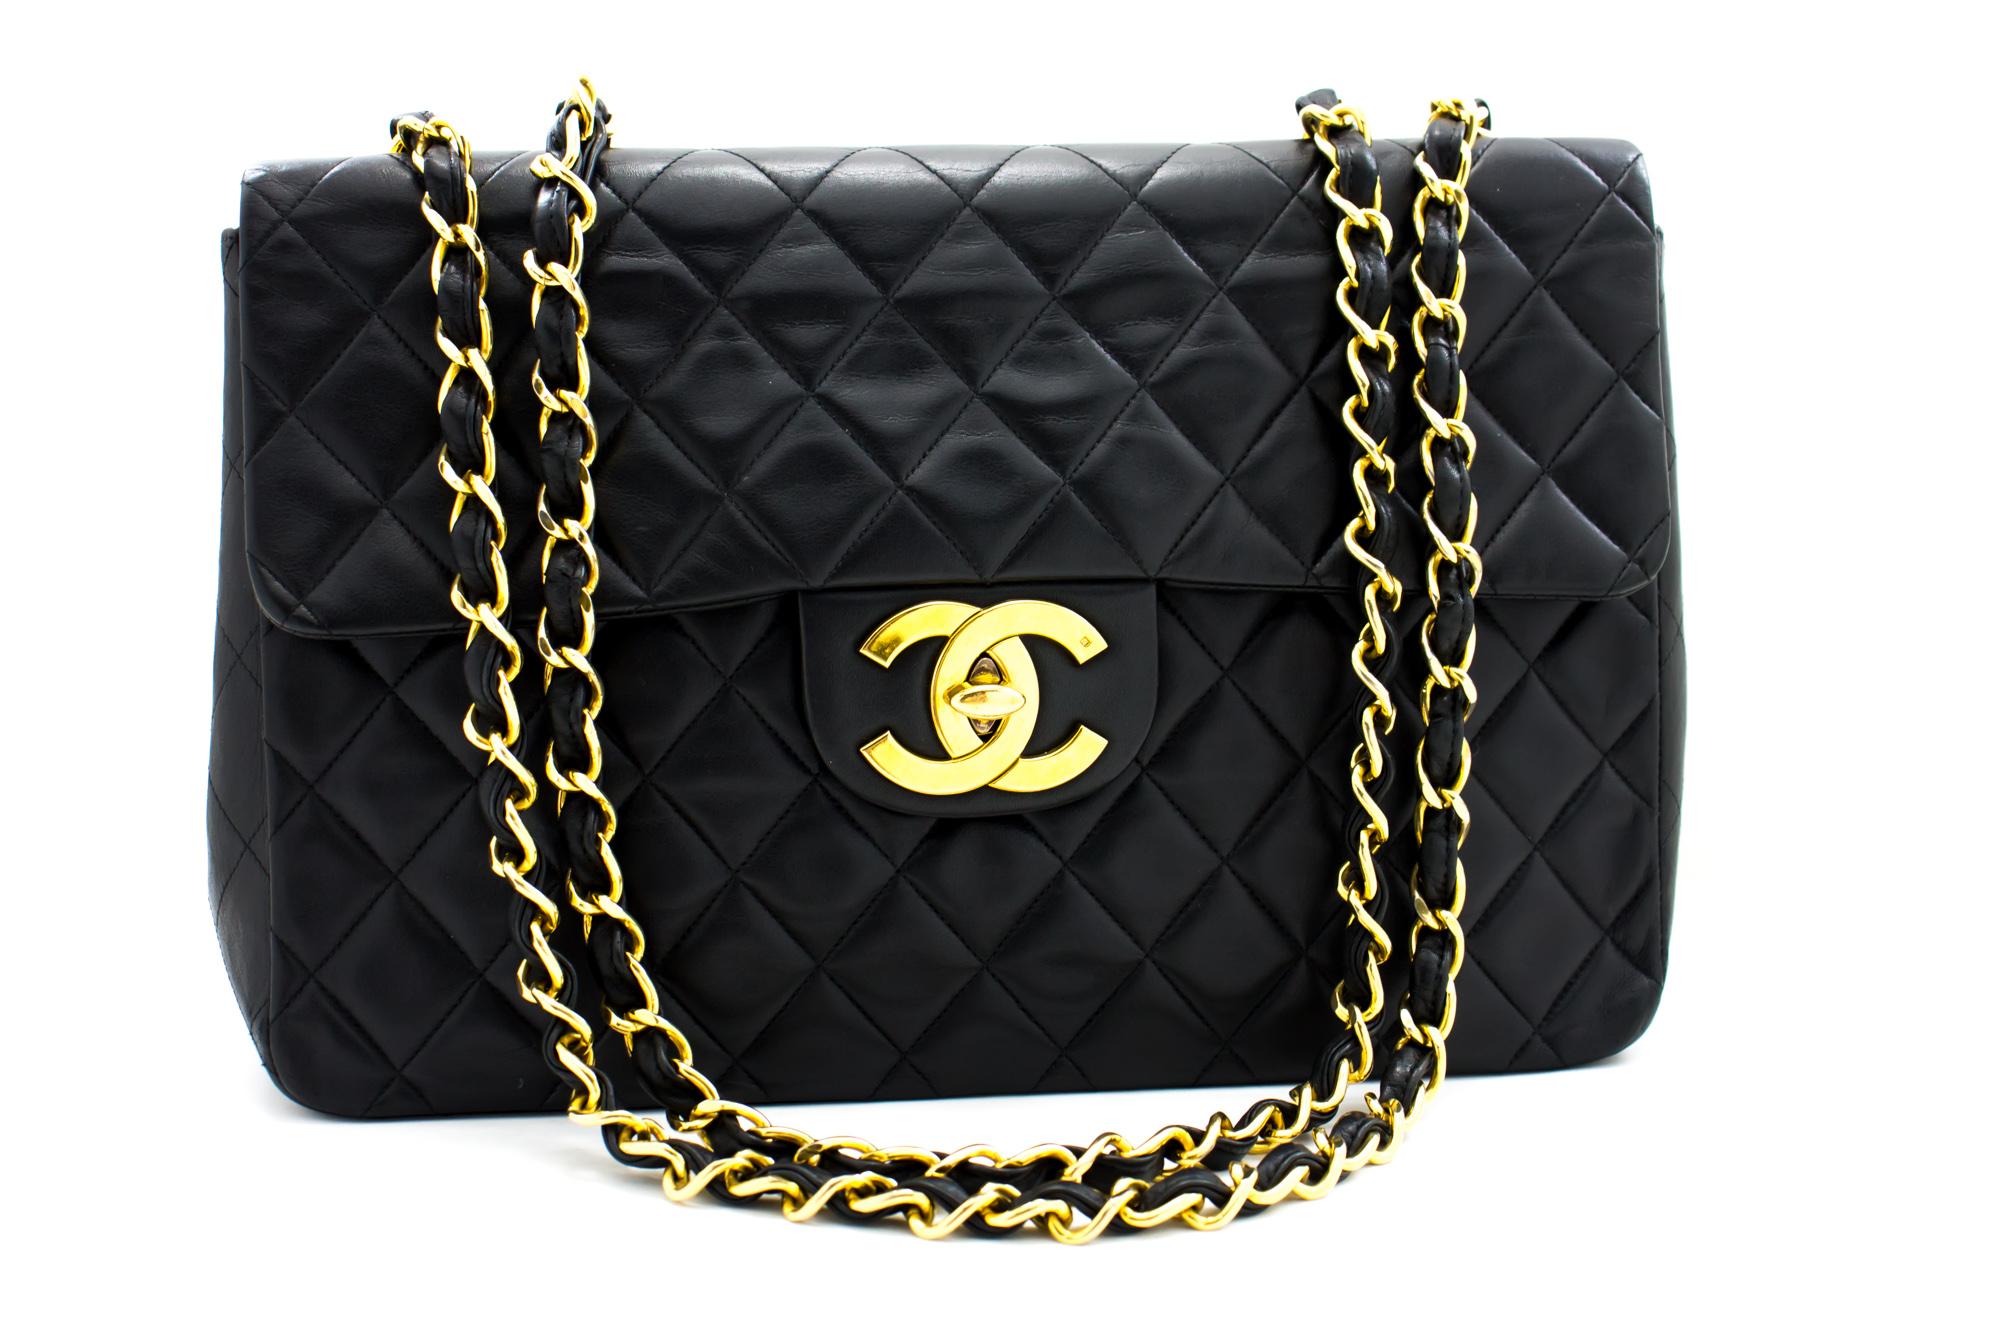 An authentic CHANEL Classic Maxi 13